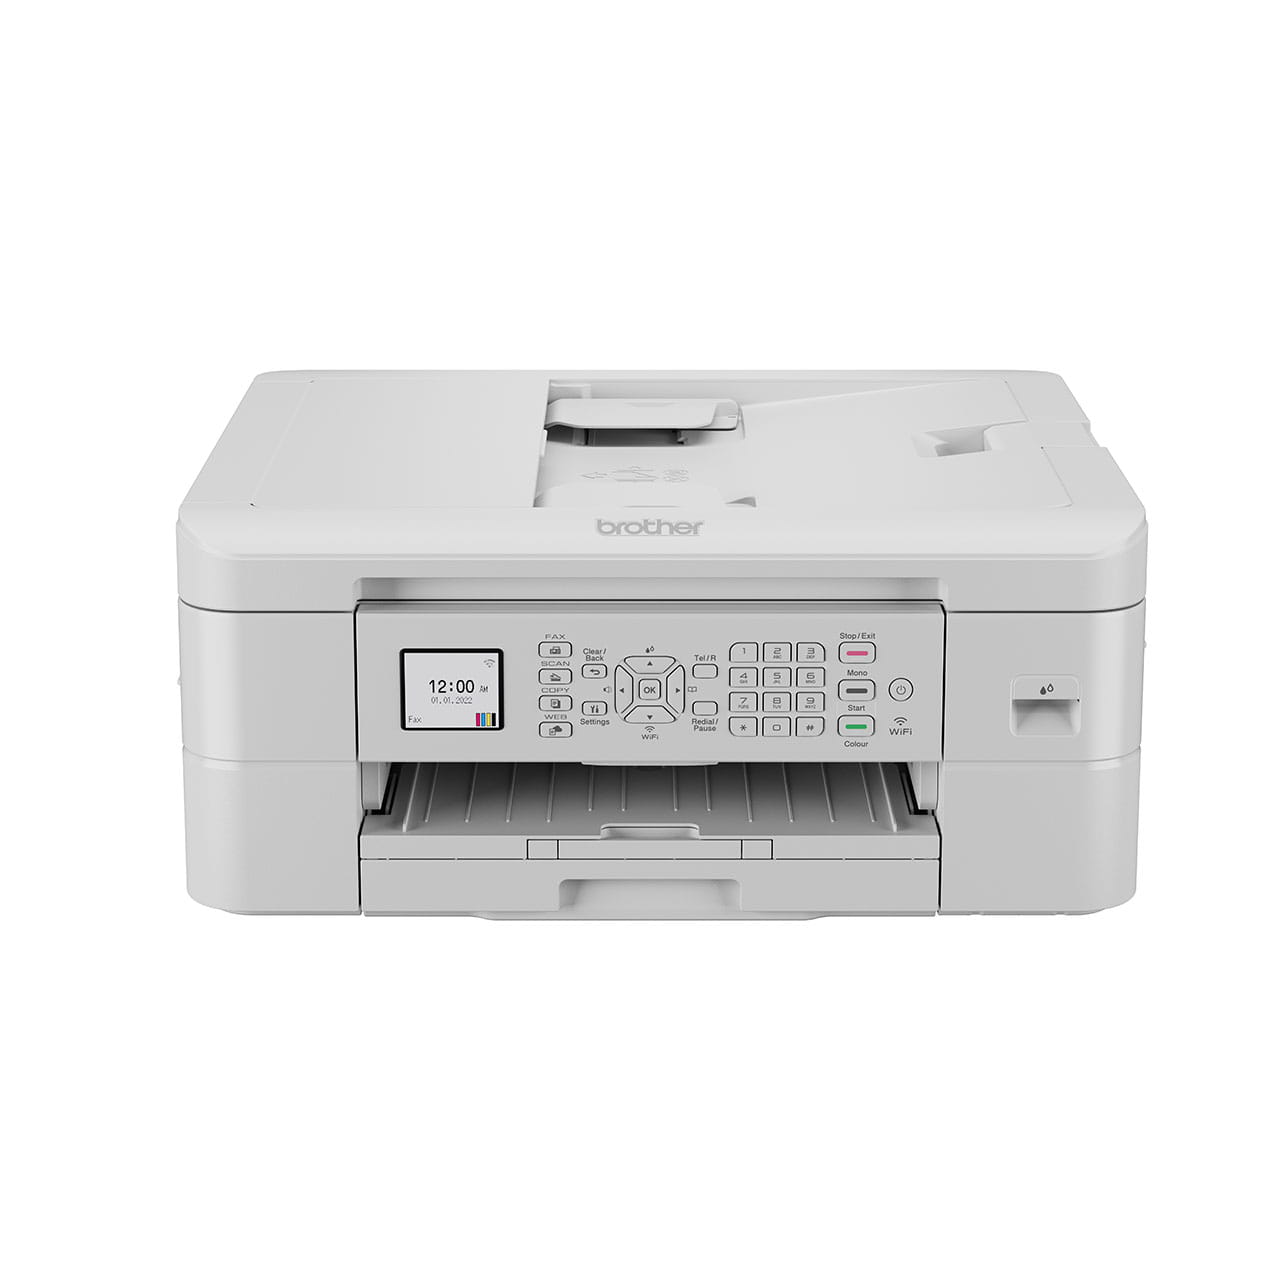 Brother MFC-J1010DW Inkjet Printer Front View